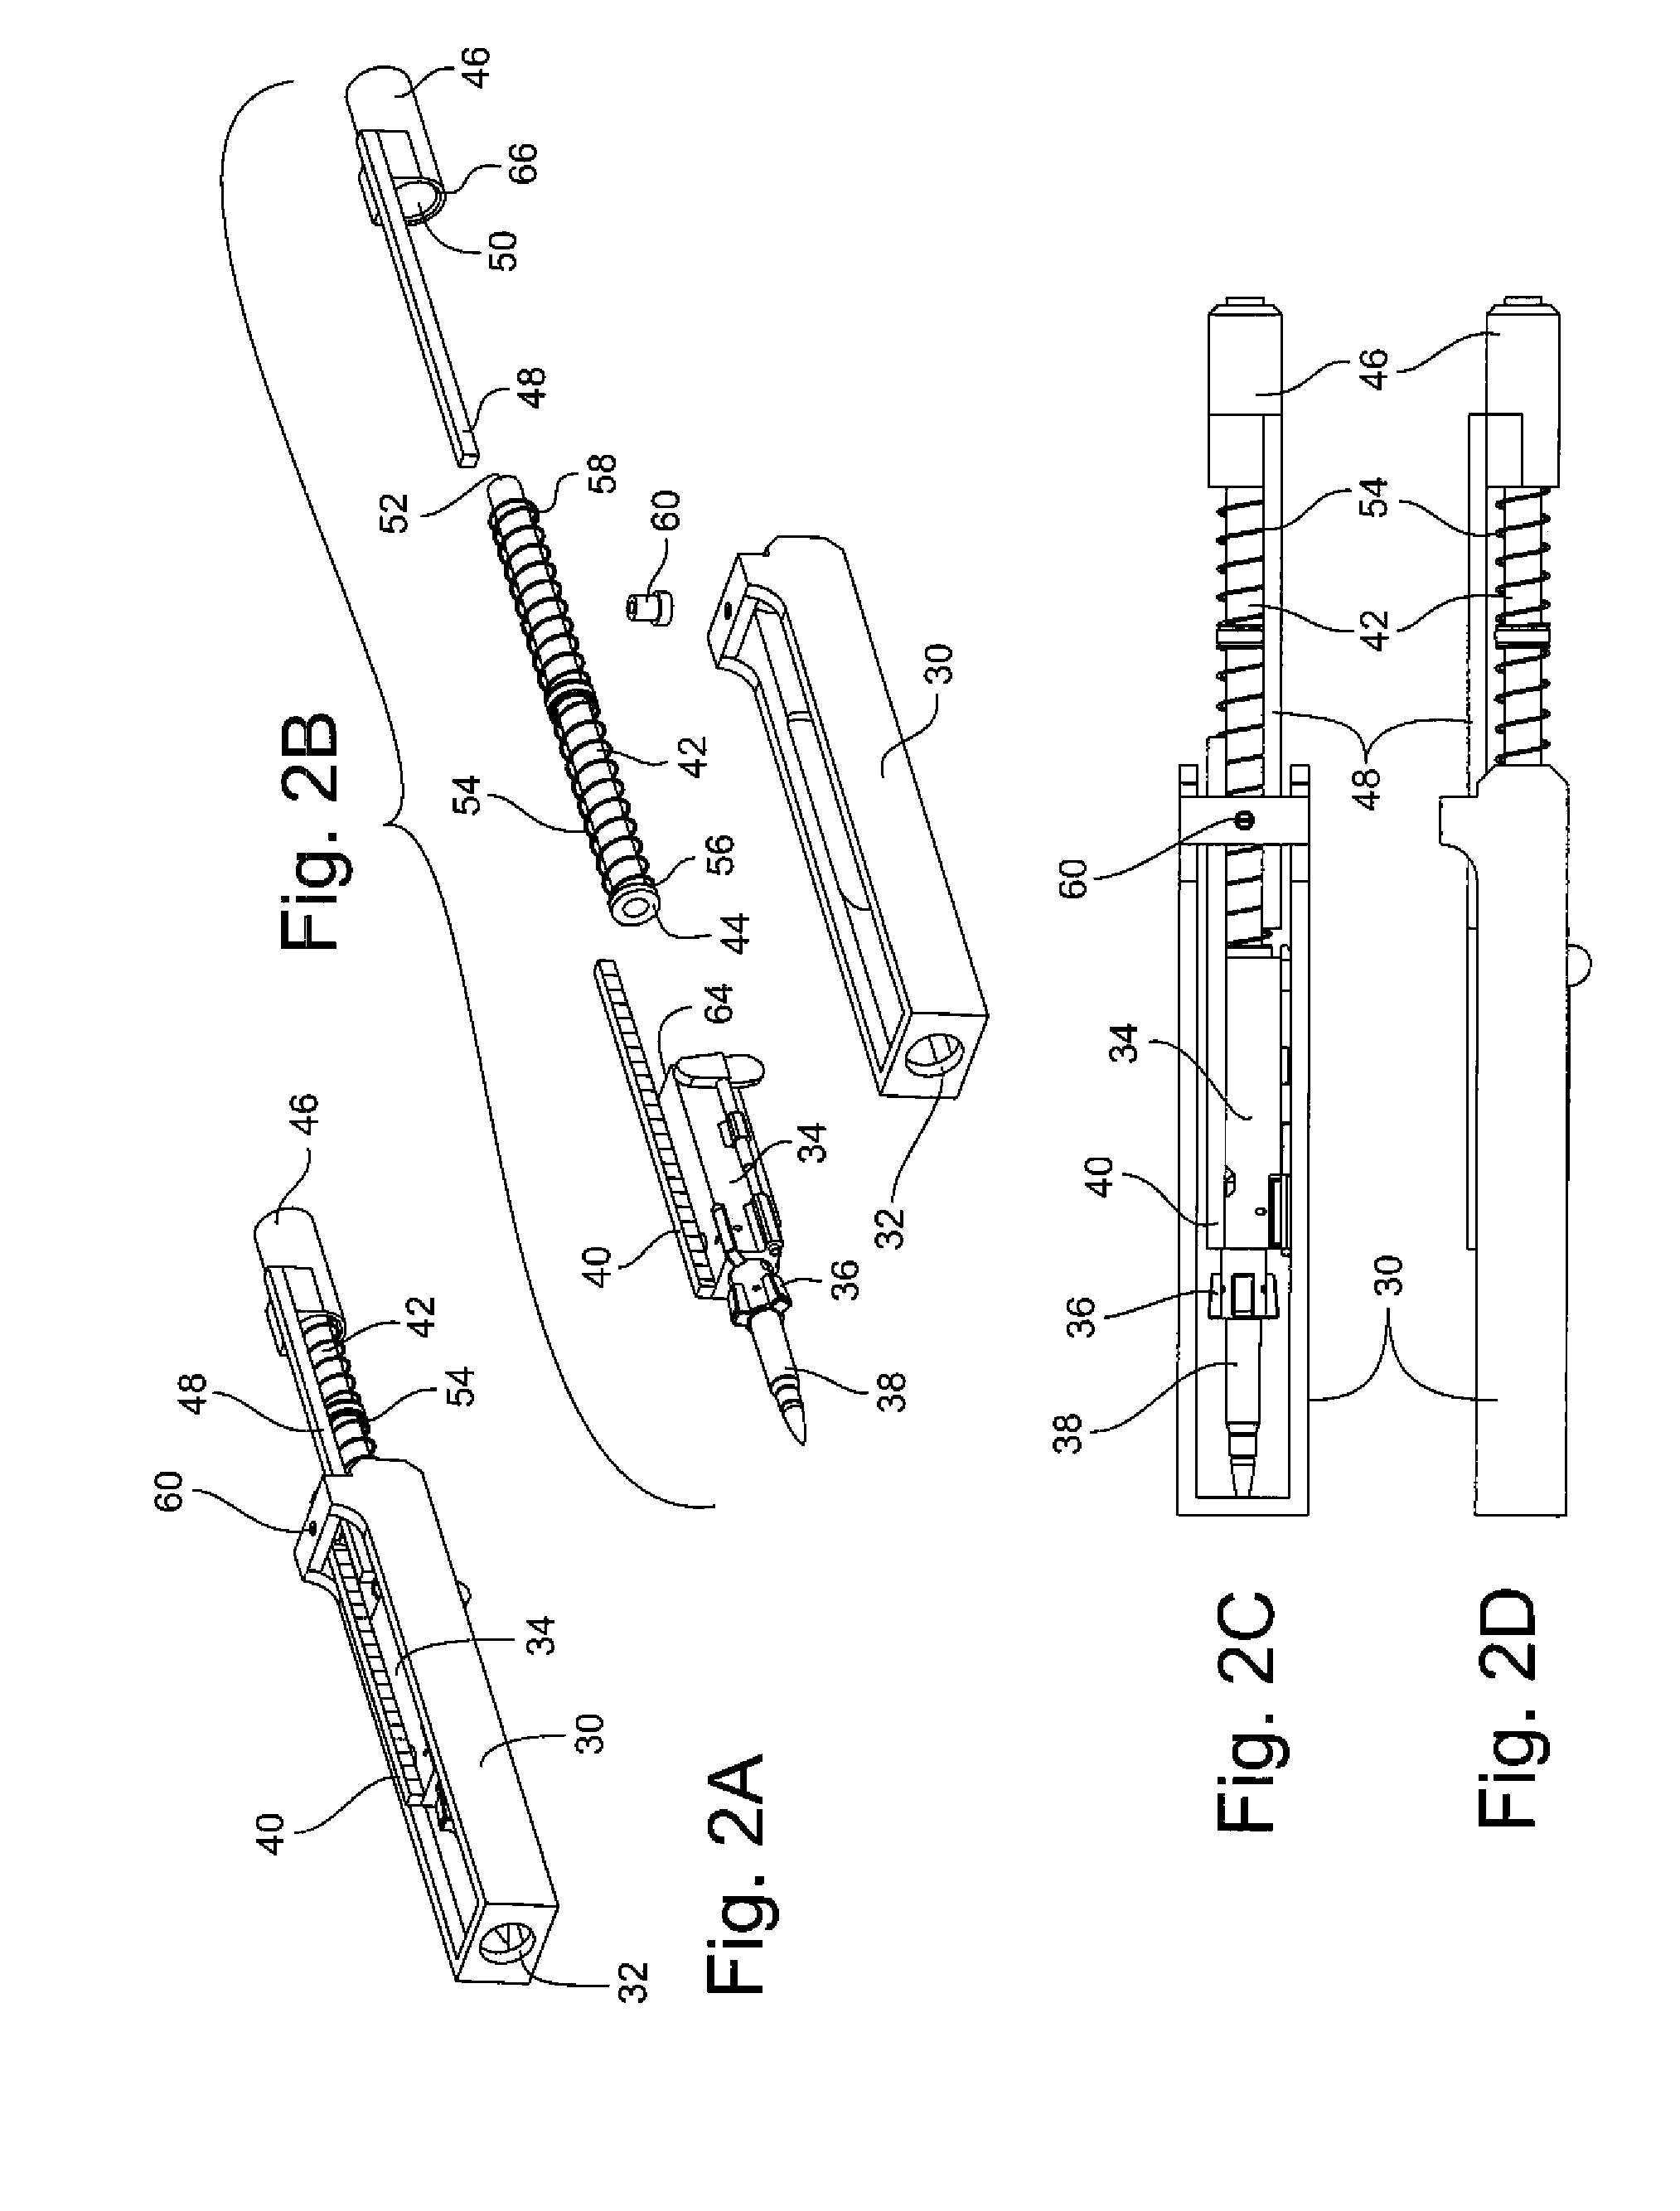 Recoil reduction apparatus and method for weapon